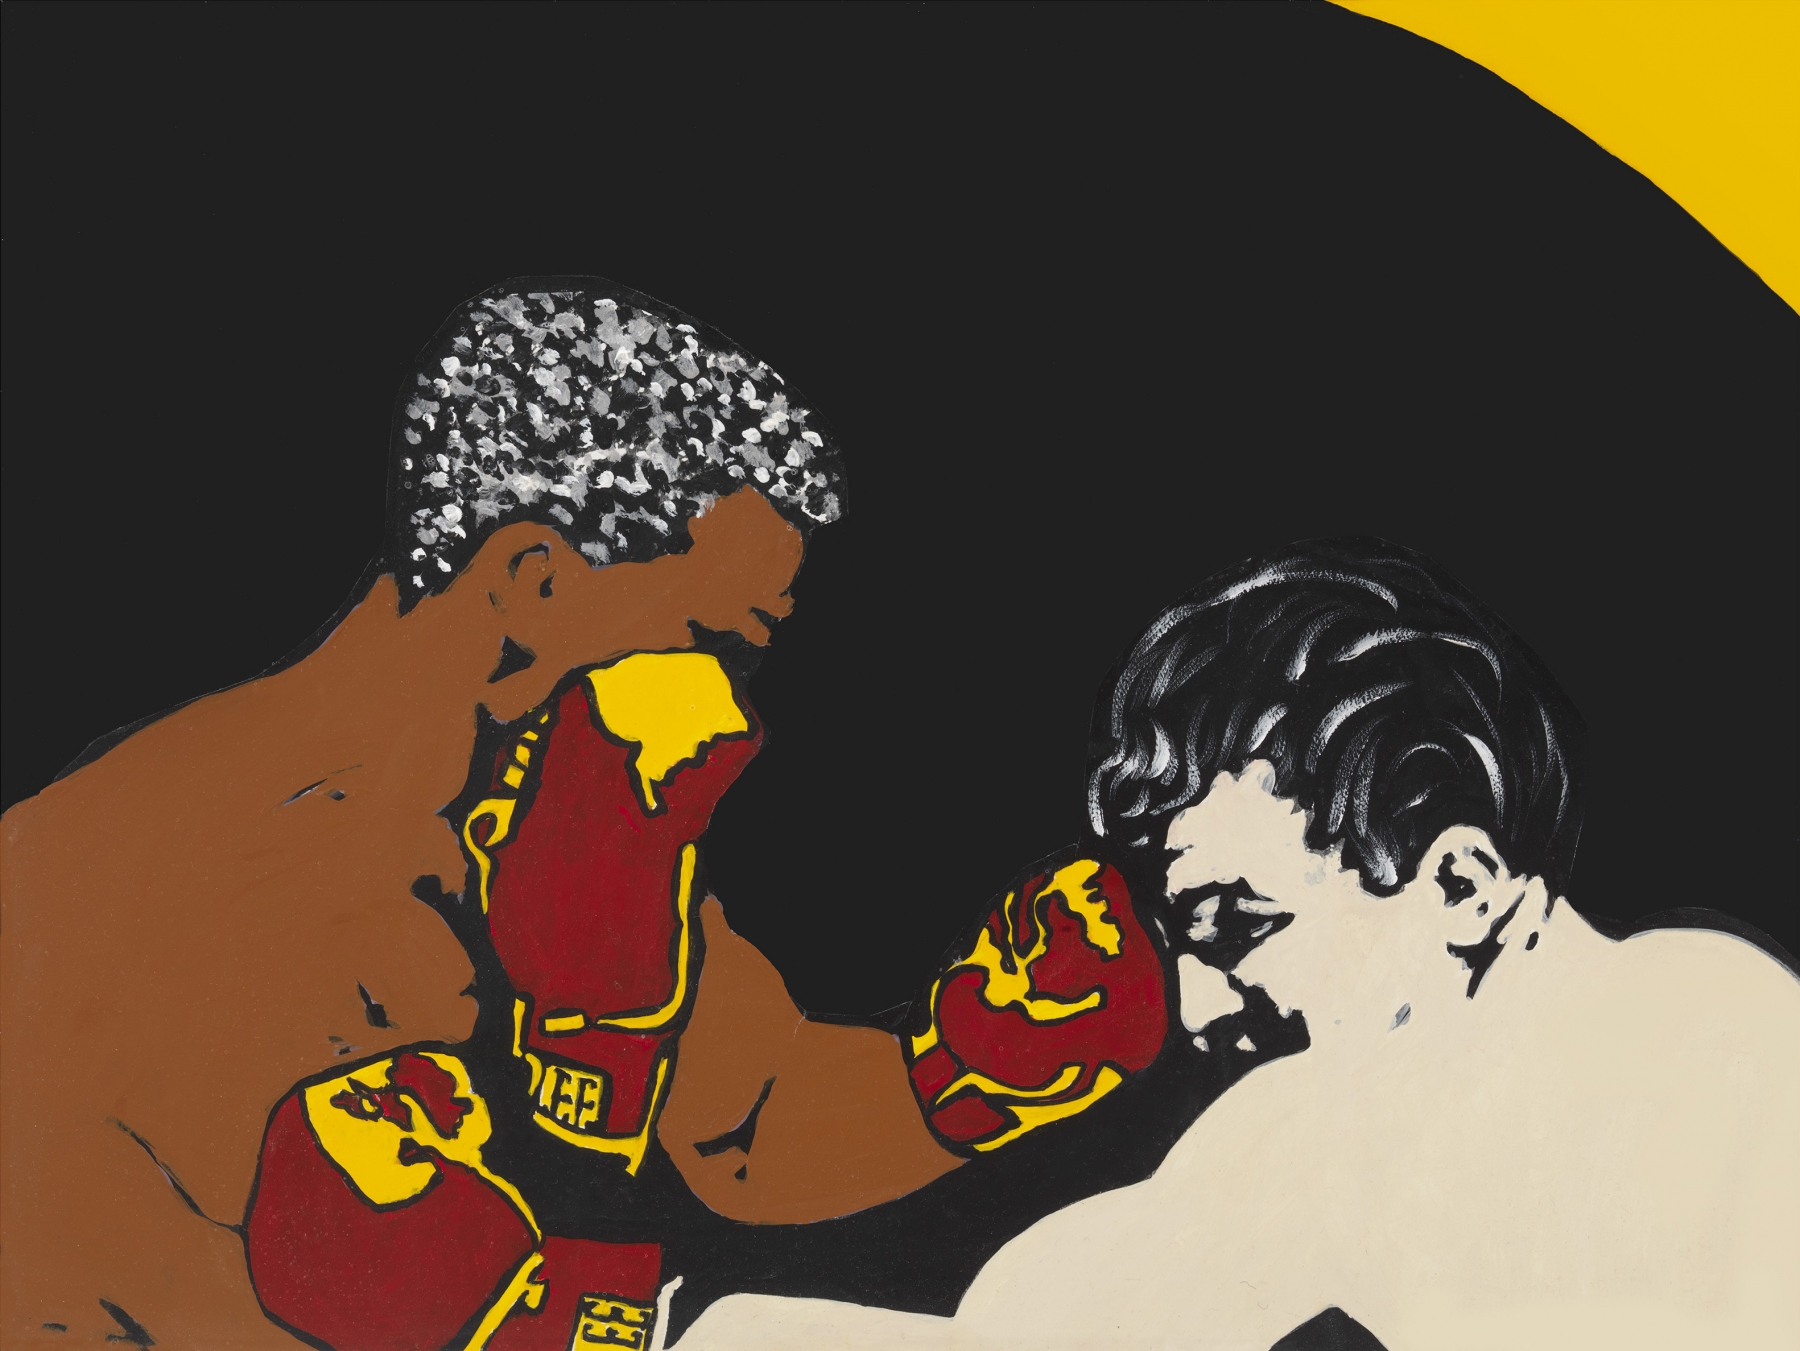 Prize Fight (Jake LaMotta and &amp;quot;Blackjack&amp;quot; Billy Fox), 1997

Acrylic and paper collage on canvas

18 x 24 inches